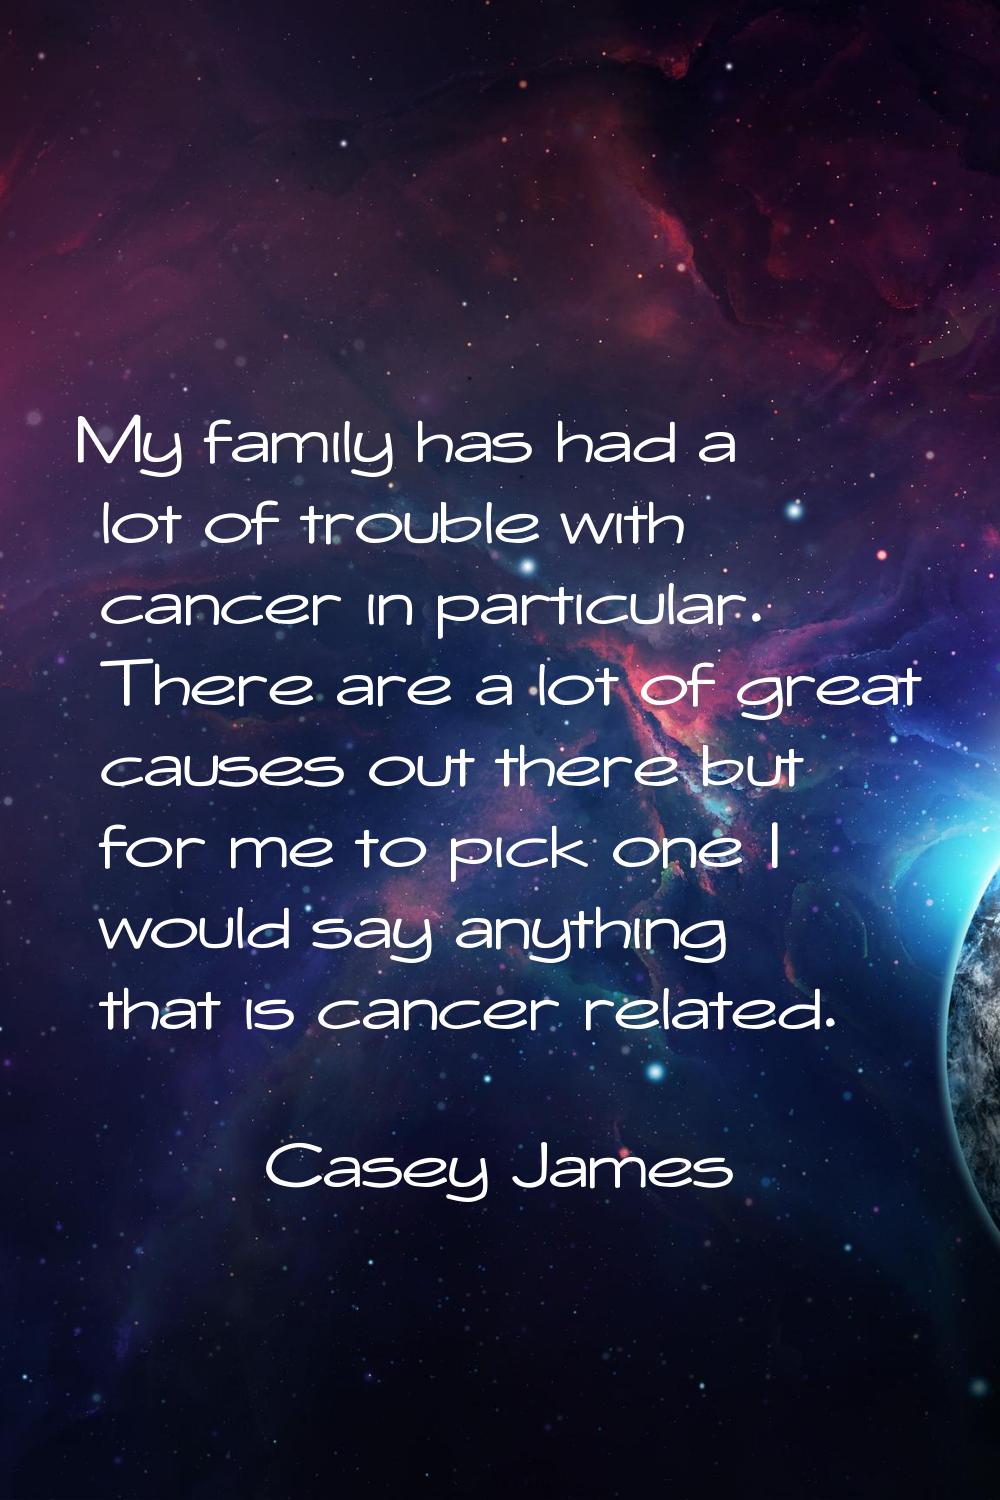 My family has had a lot of trouble with cancer in particular. There are a lot of great causes out t